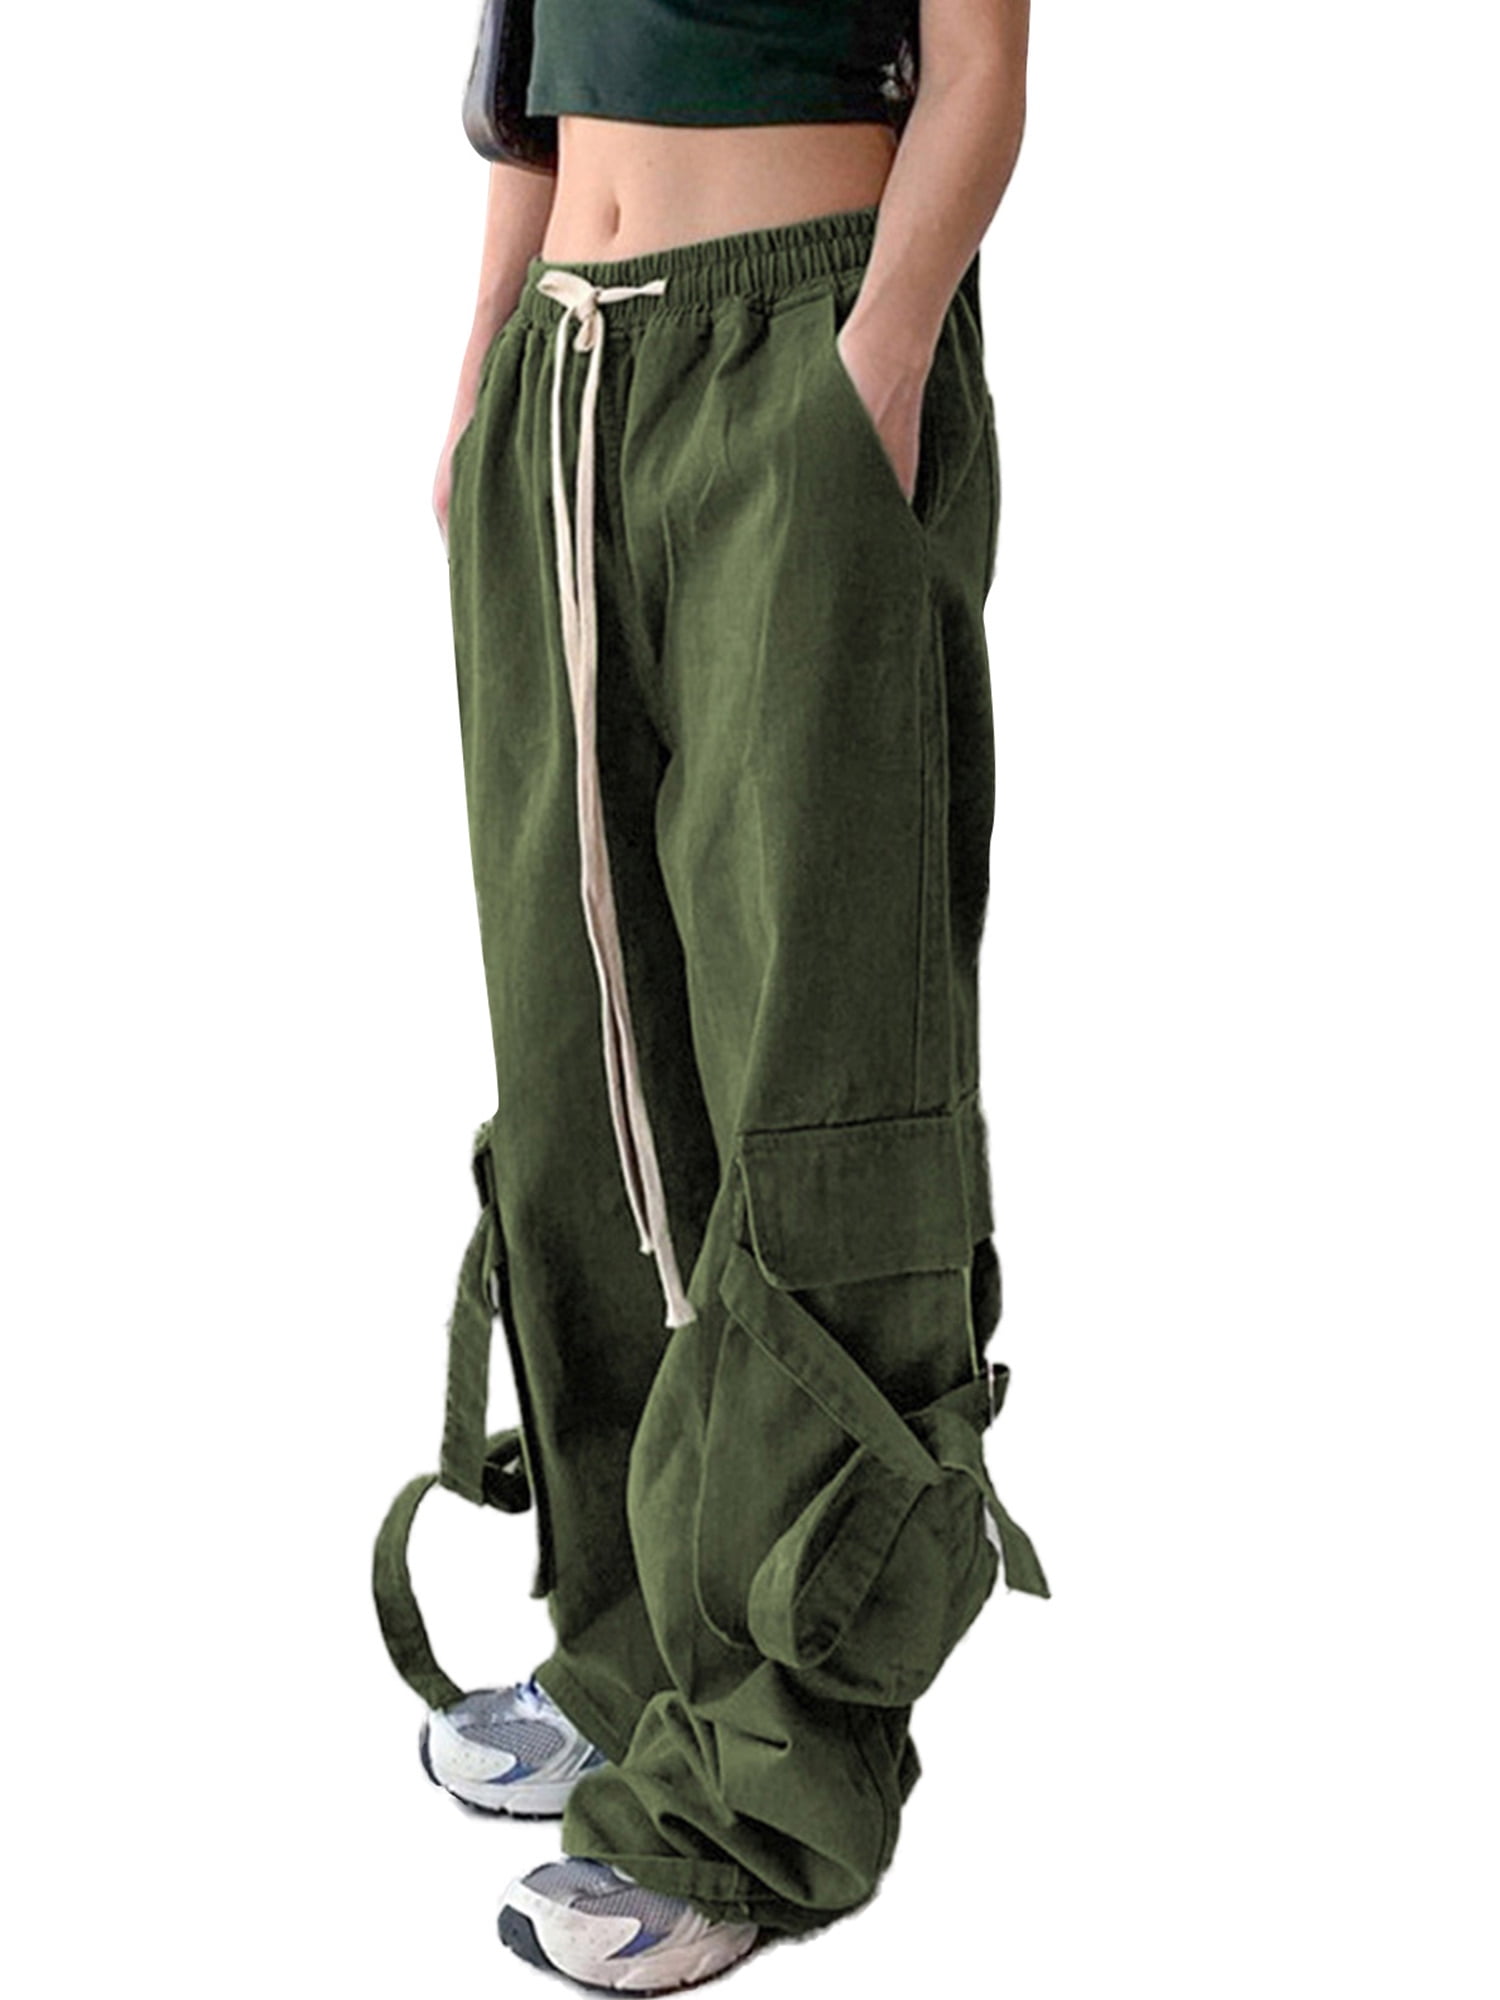 One opening Women Juniors Casual Trousers Drawstring Tie-Up Waist